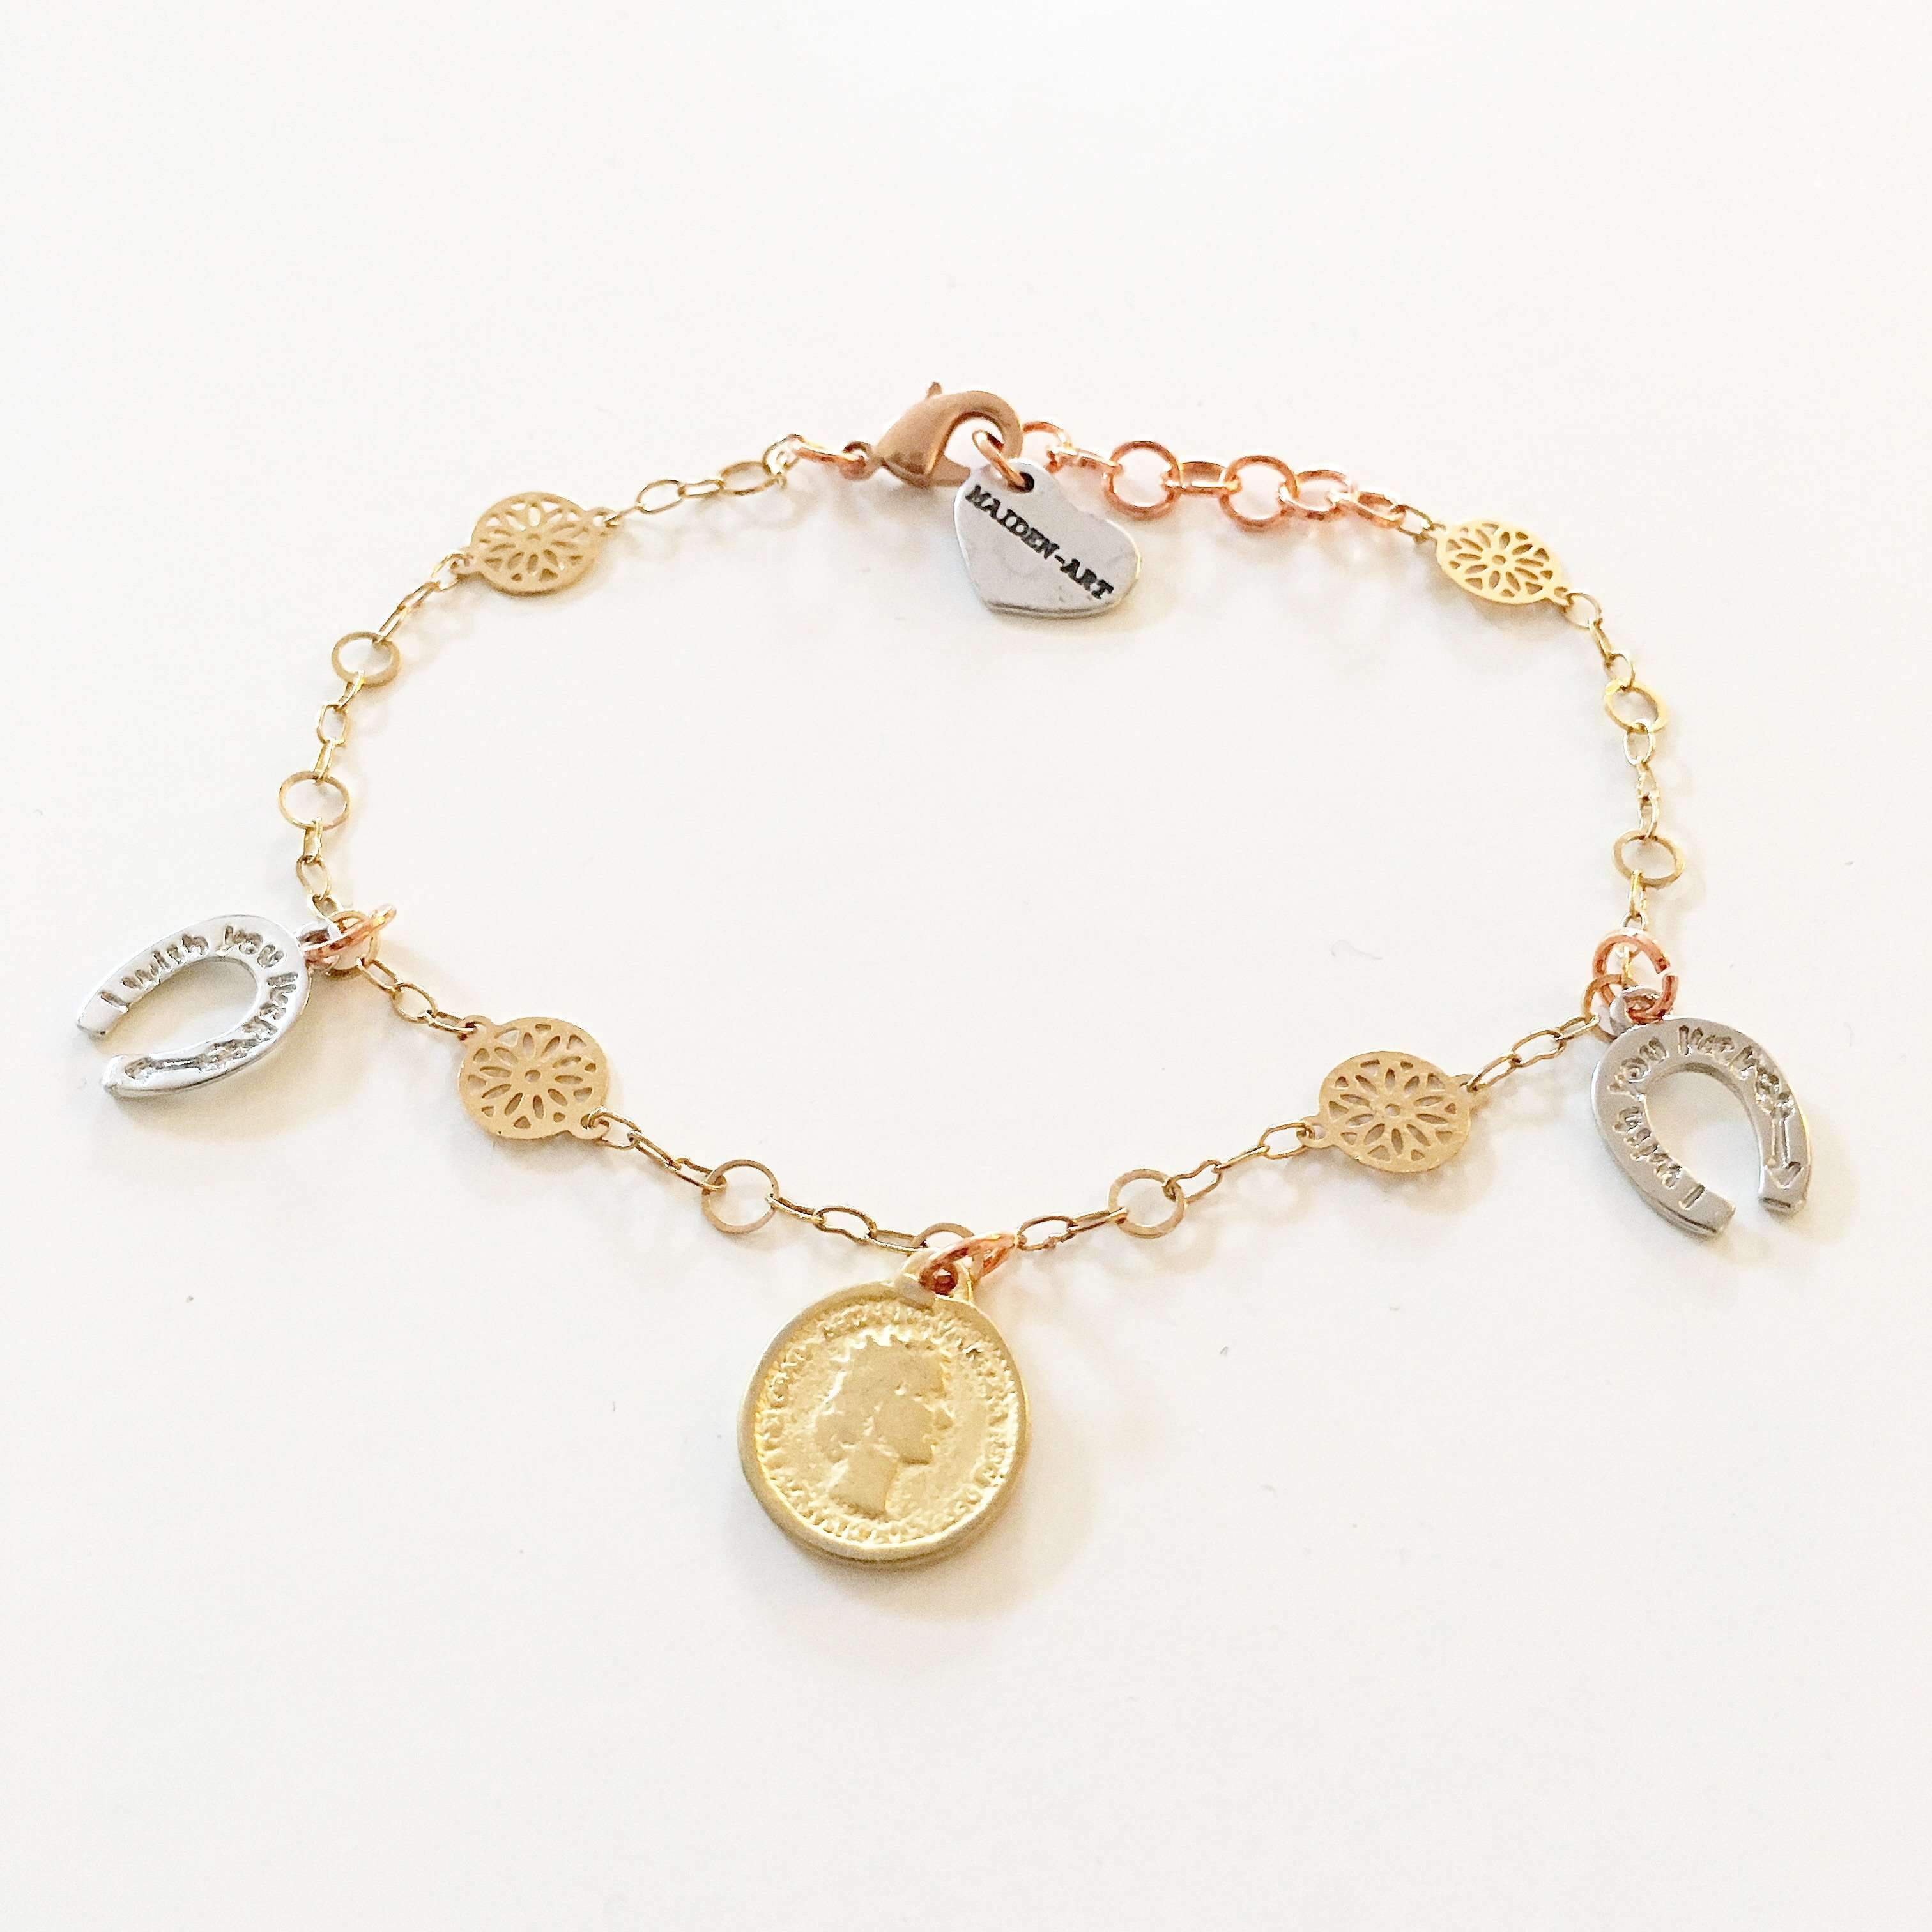 Coin and Horseshoes Lucky Charm Bracelet in 18kt Gold Plated - Handmade in Italy 🍀Adjustable Size, High Quality Materials, Rock and Romantic Style Tips, Maiden-Art Guarantee and Giving Back to Cancer Research Bijou Her